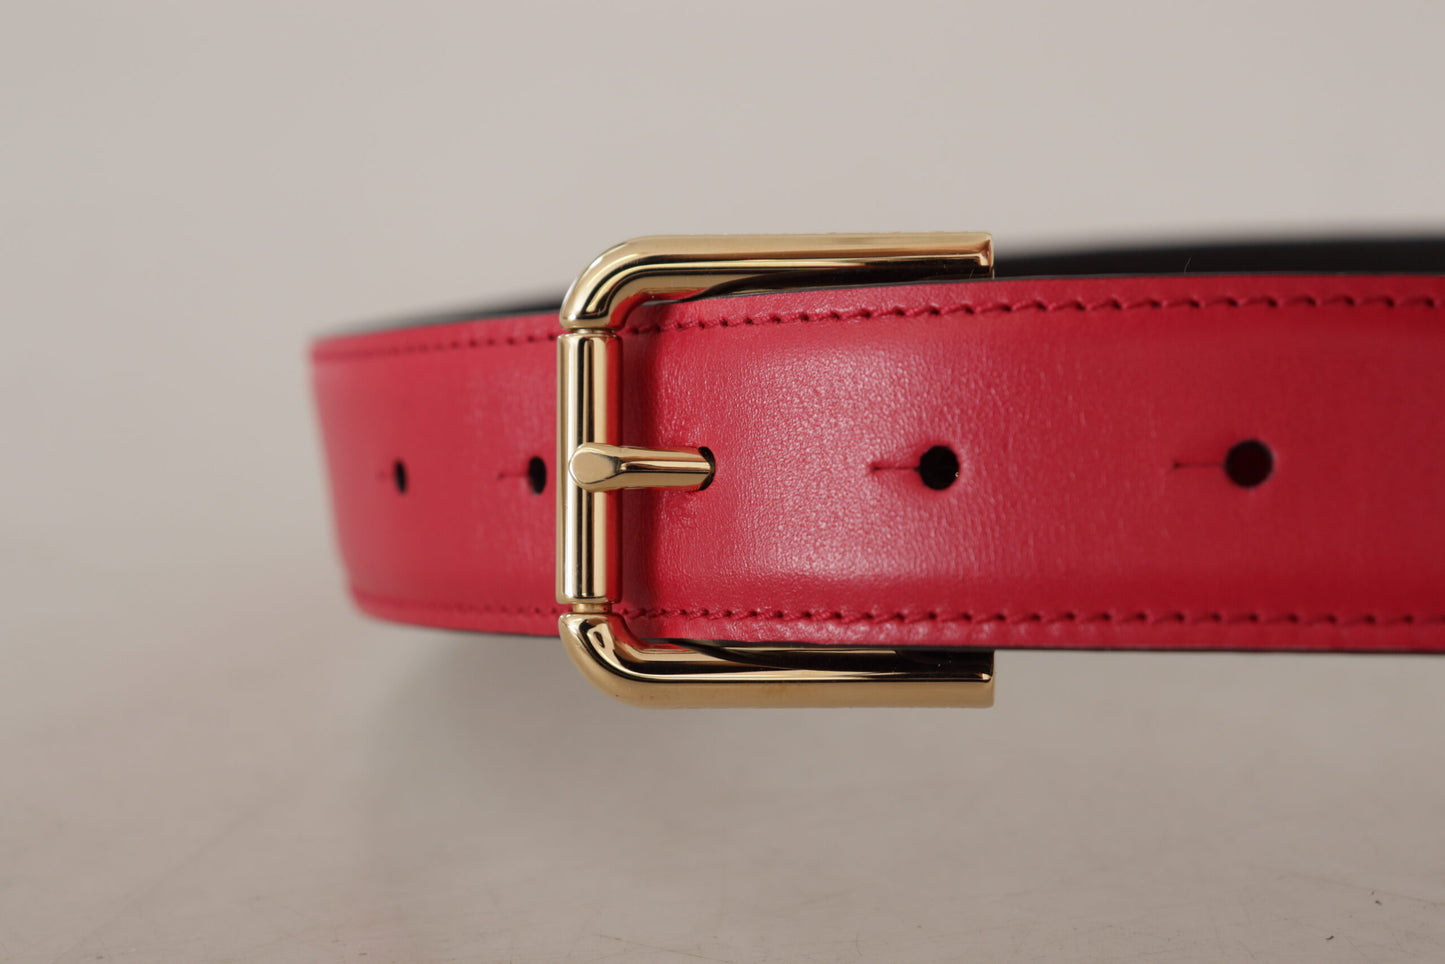 Dolce & Gabbana Elegant Red Leather Belt with Gold-Tone Buckle